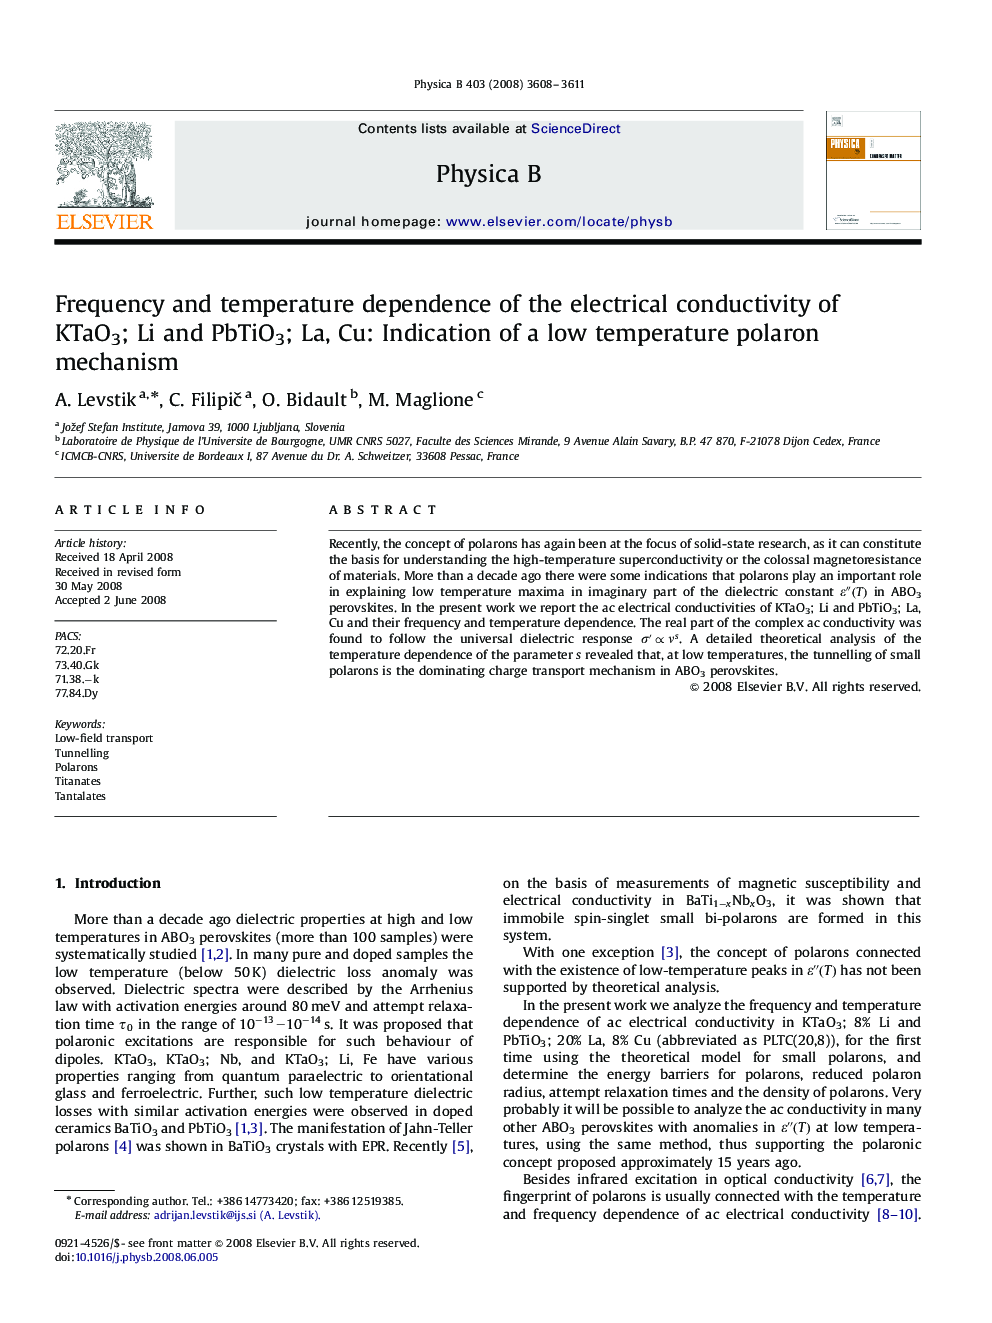 Frequency and temperature dependence of the electrical conductivity of KTaO3; Li and PbTiO3; La, Cu: Indication of a low temperature polaron mechanism